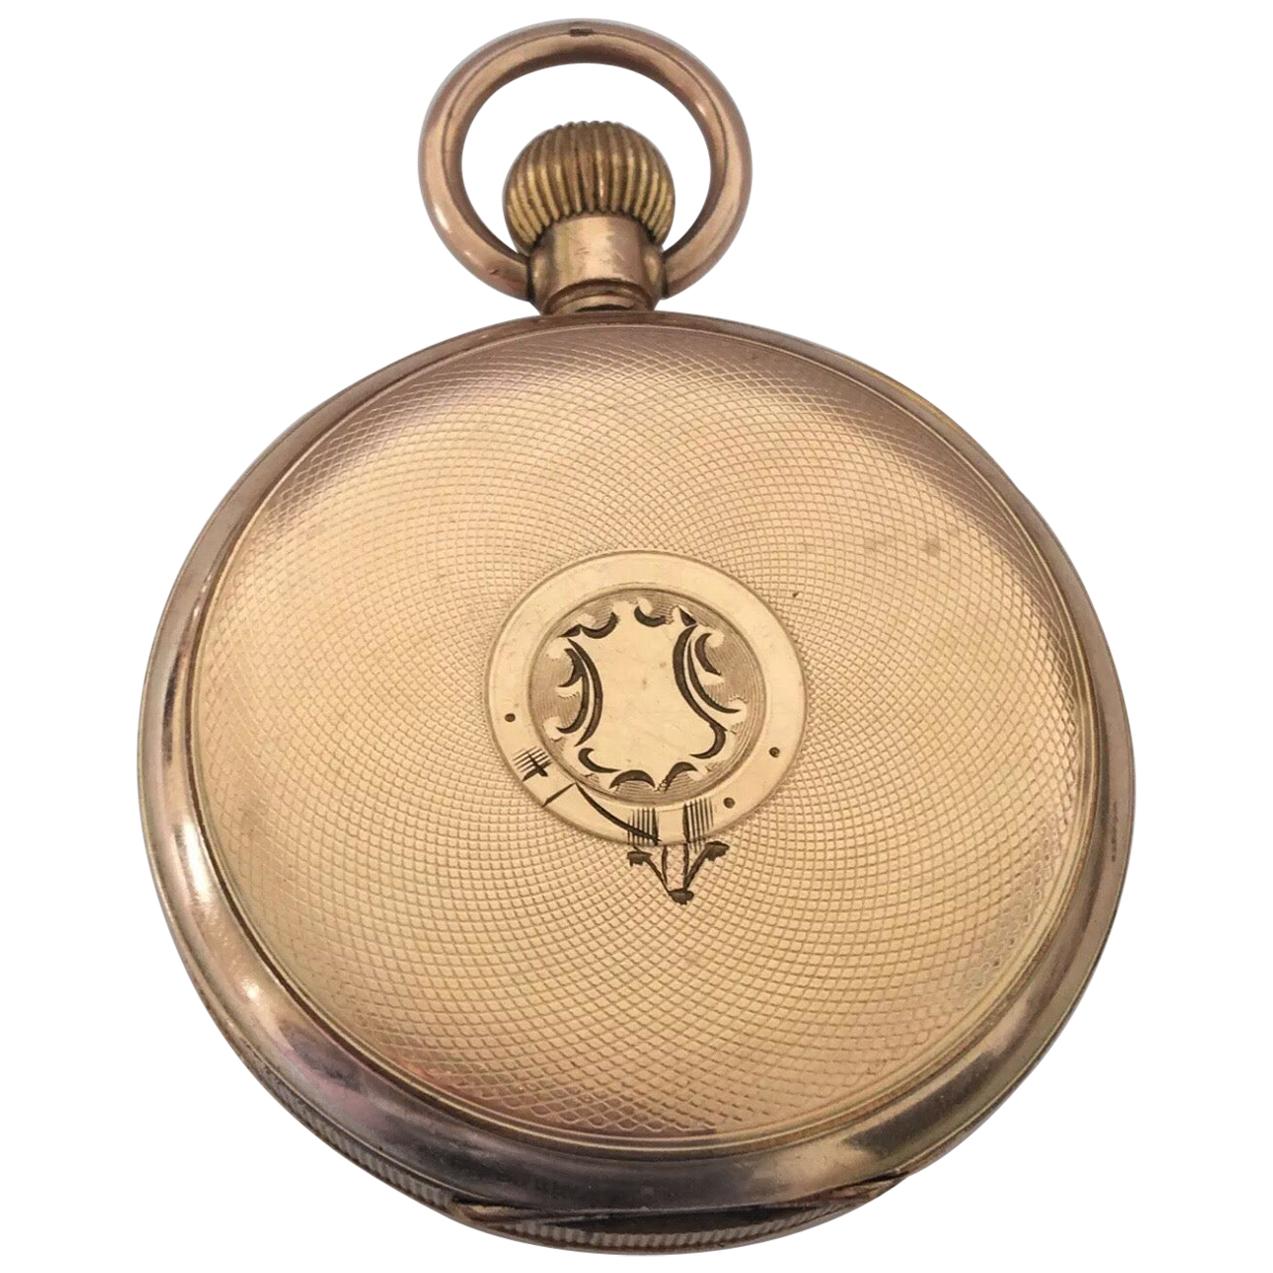 An 8 Days Swiss Made Hebdomas Visible Escapement Gold-Plated Pocket Watch